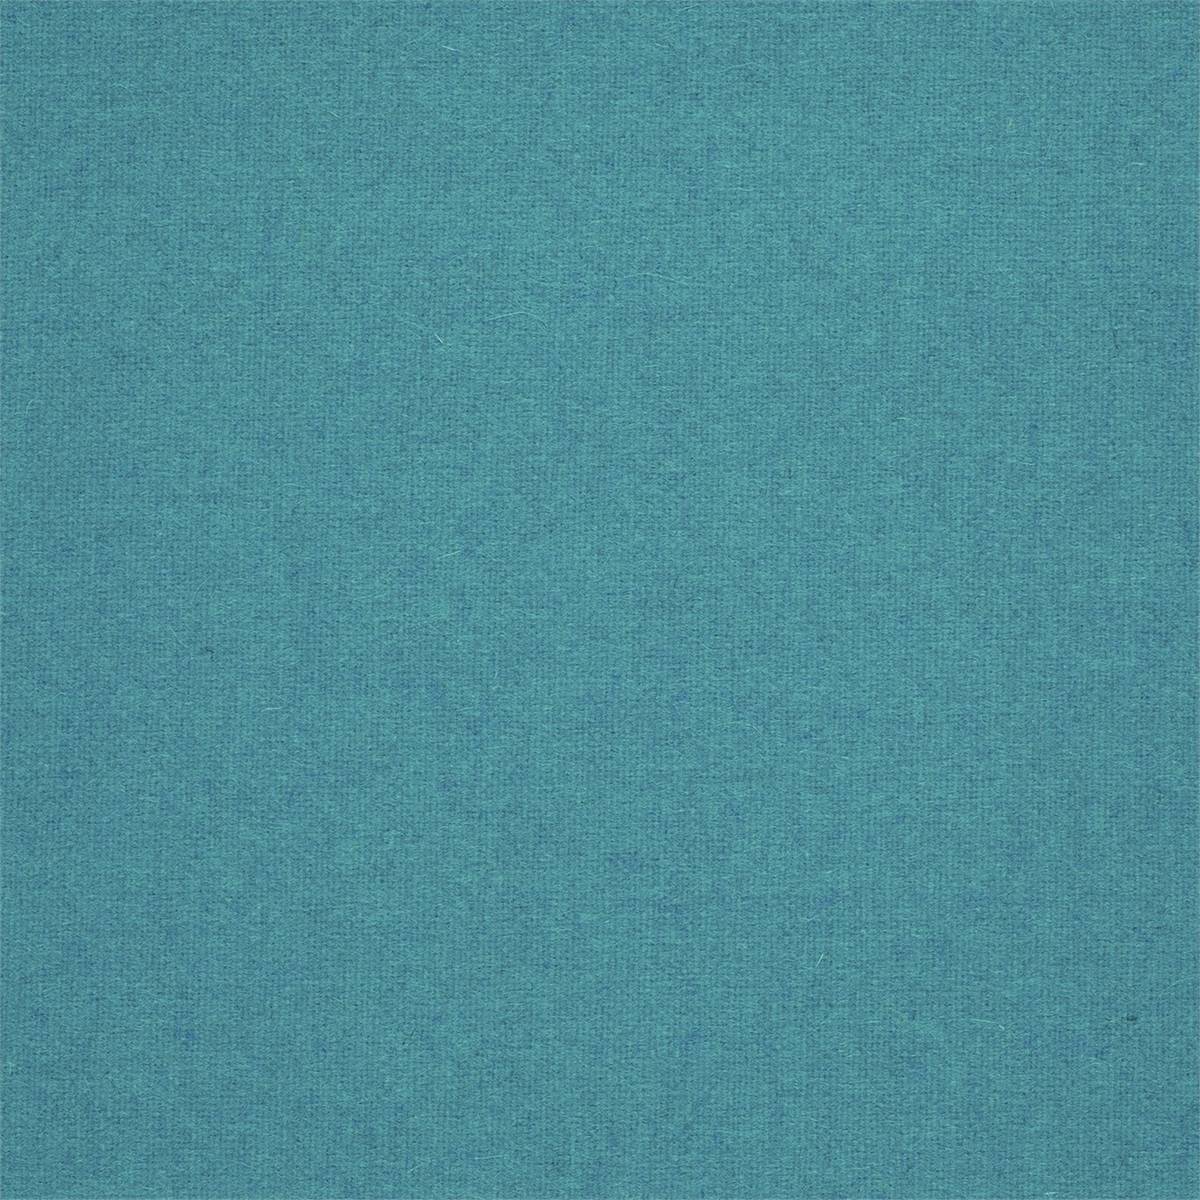 Hue Teal Fabric by Harlequin